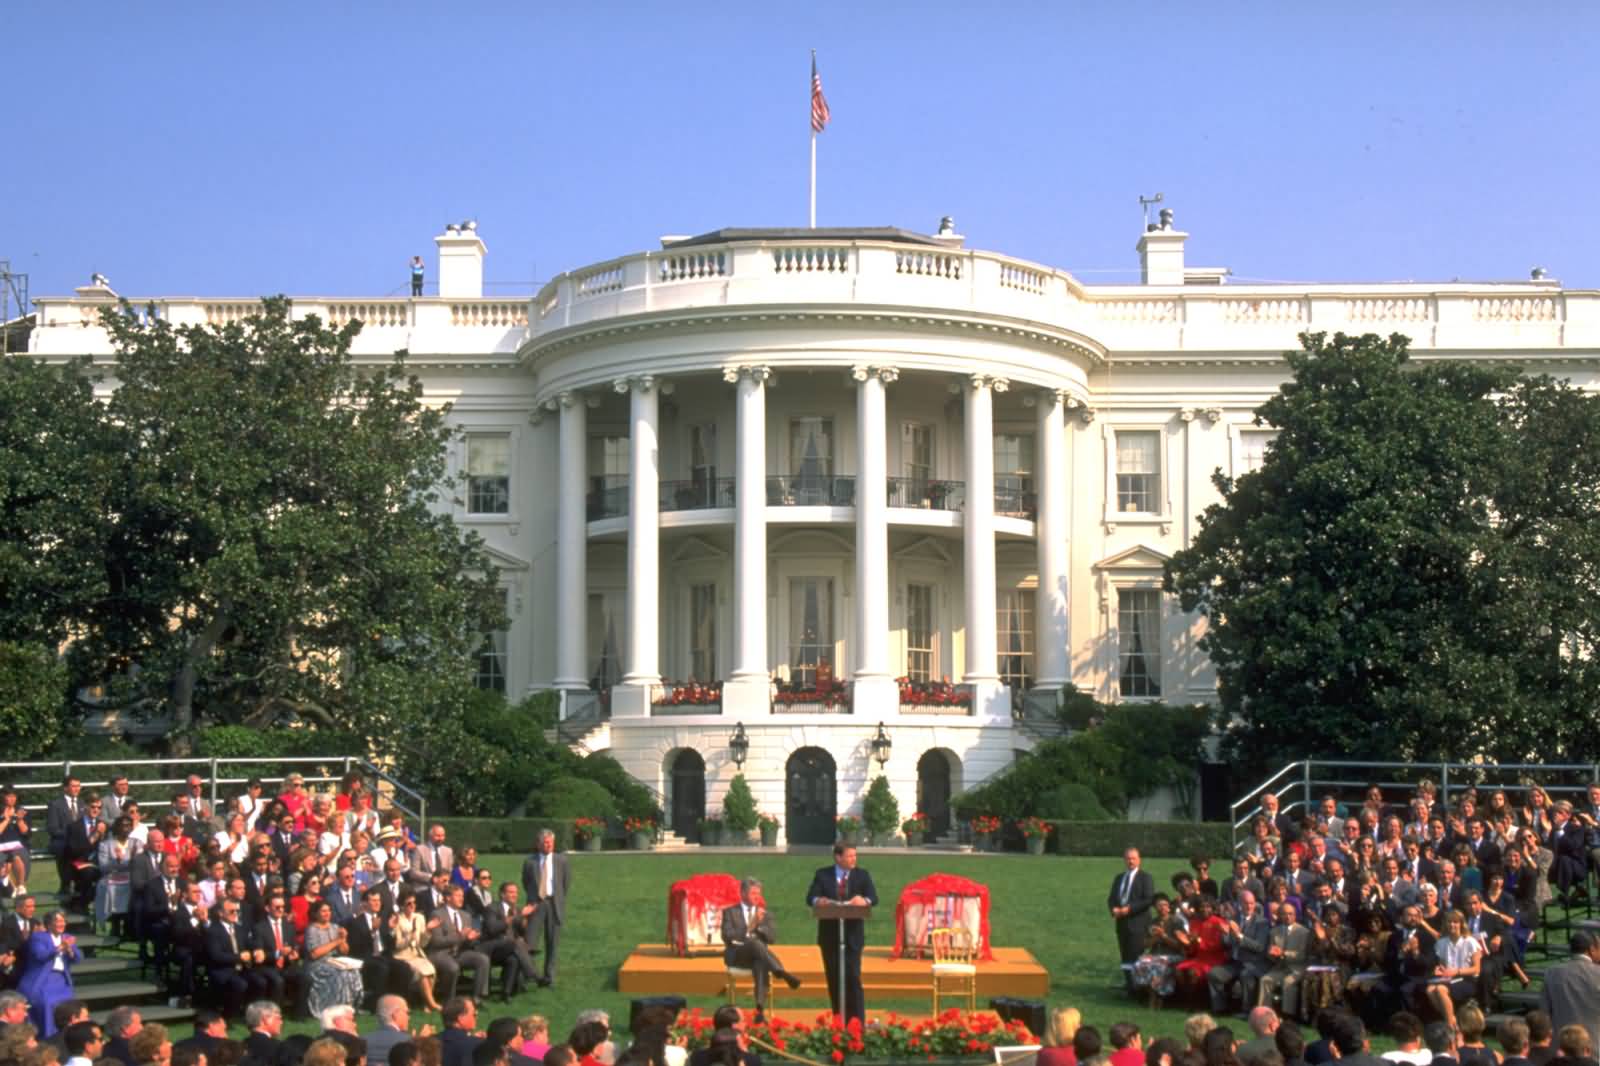 The White House Event